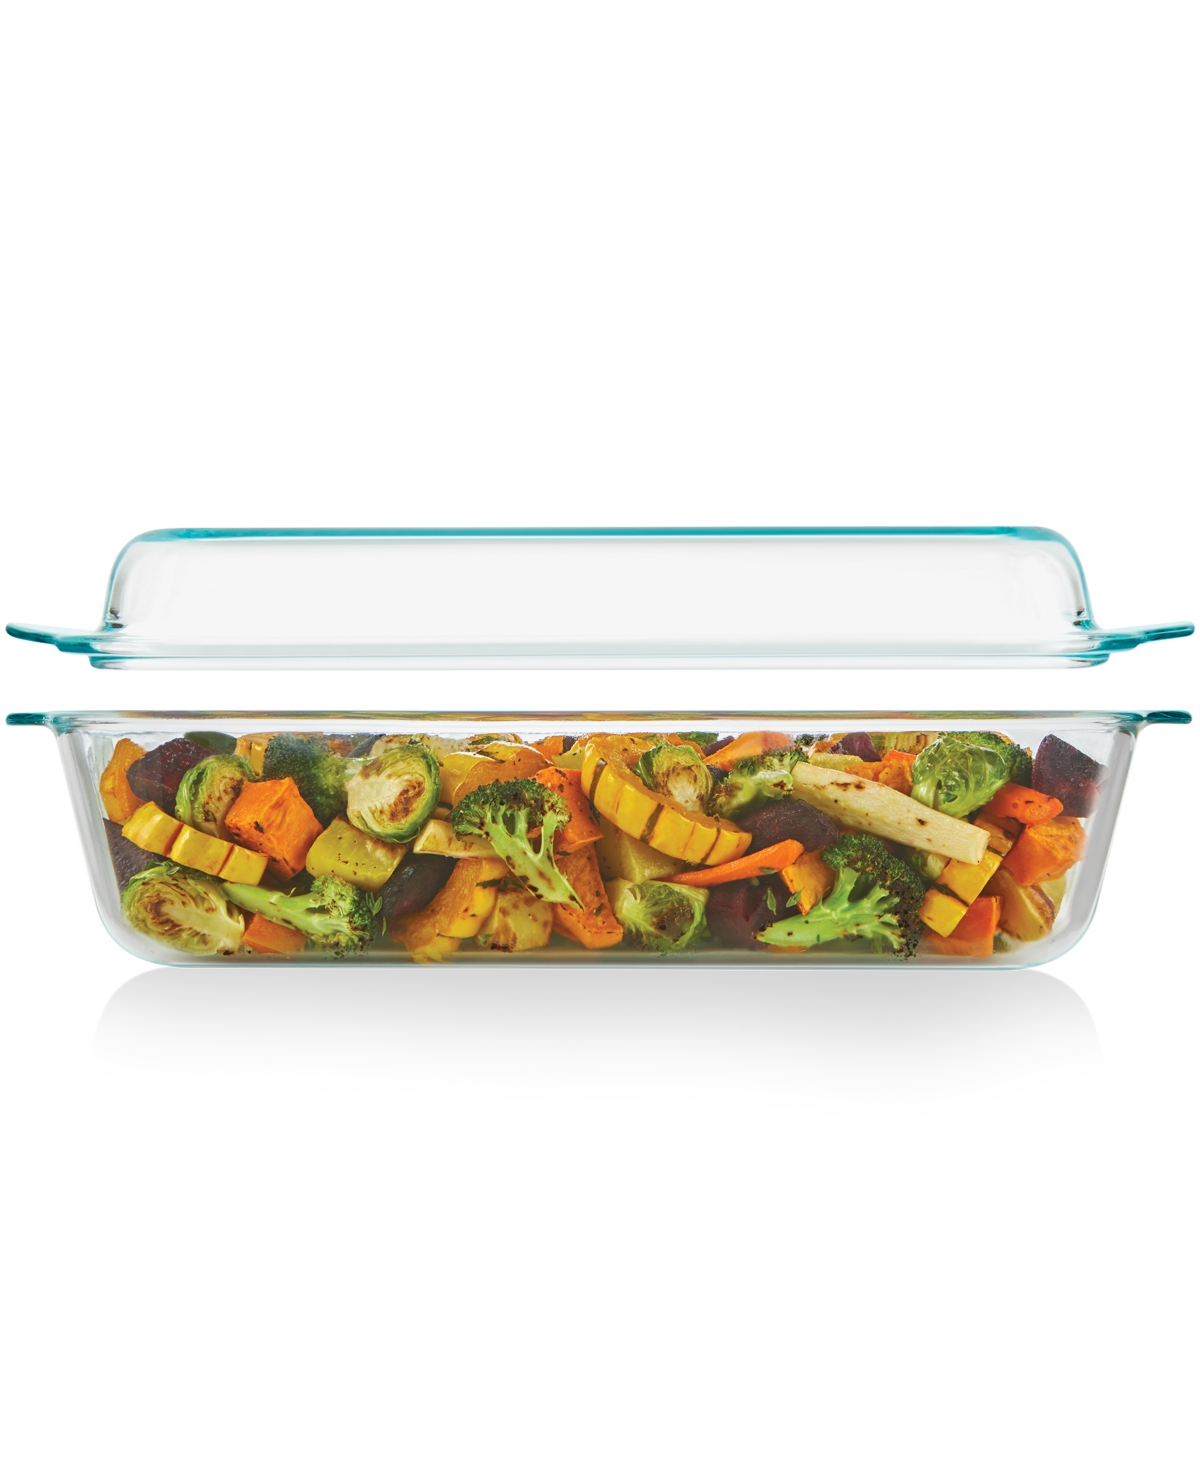 Pyrex Deep 9" X 13" 2 In 1 Glass Baking Dish With Glass Lid, Set Of 2 In Clear Glass